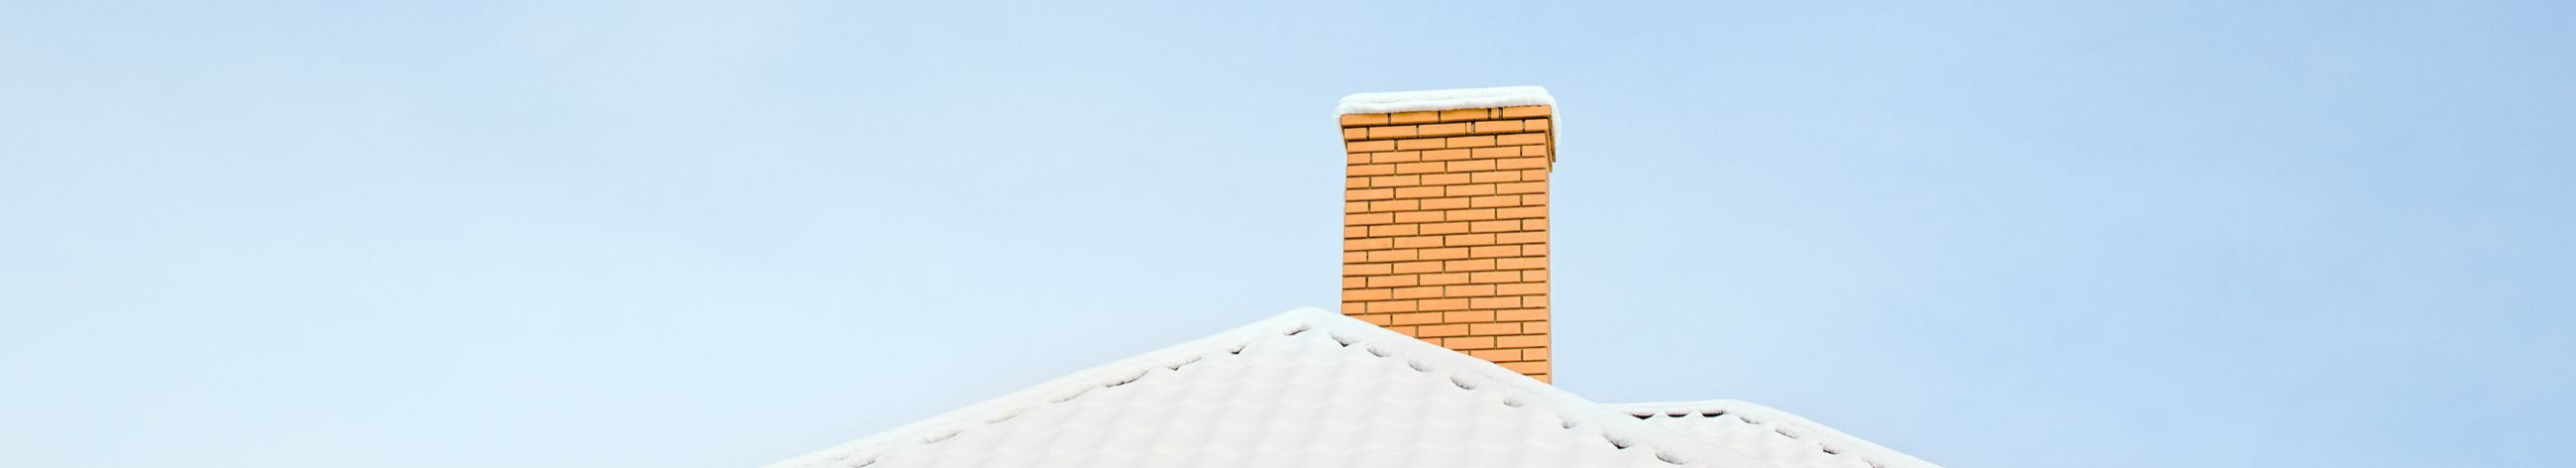 Chimney, chimney work, stack storage, chimney renovation, chimney construction, Potter\'s, masonry work, snow control of roofs, drone video and photography, lawn mowing service